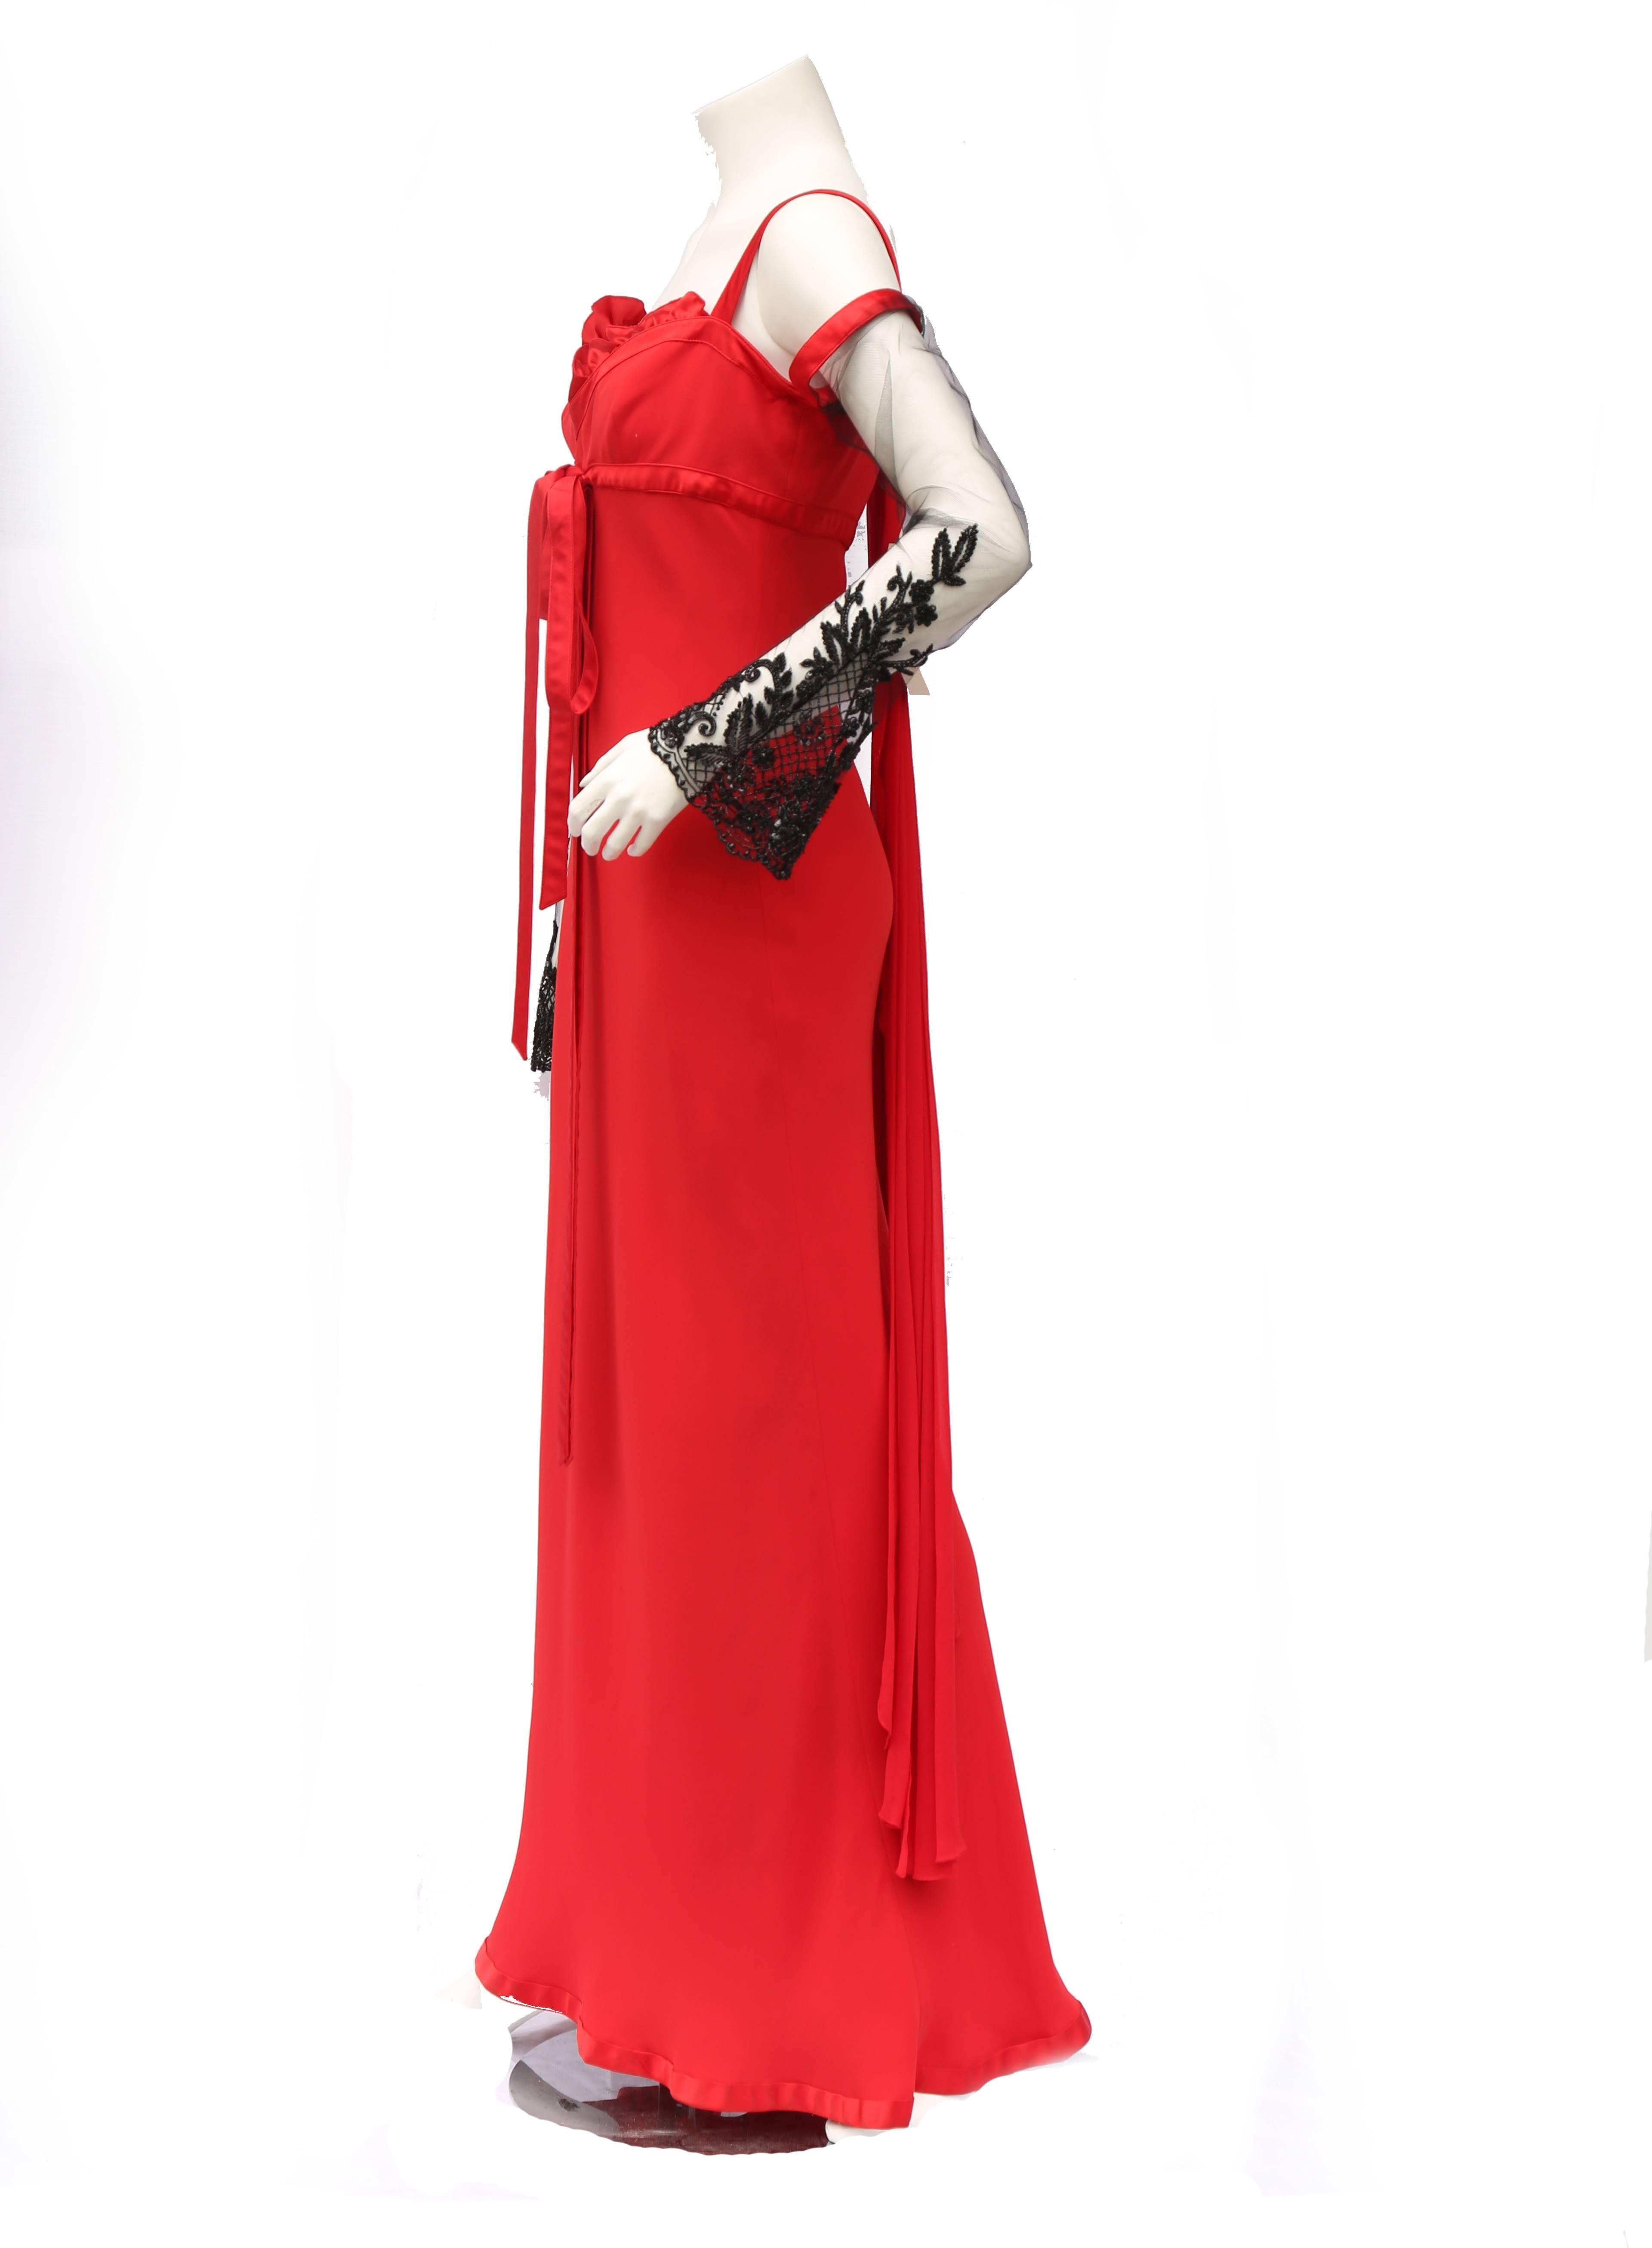 A classic red Valentino gown with bow detail on the front and a chiffon drape detail on the back complete with dramatic lace net sleeve embellished with beads and sequins

Measurements taken flat in inches
Bust – 14 
Waist – 15
Hips -20
Length